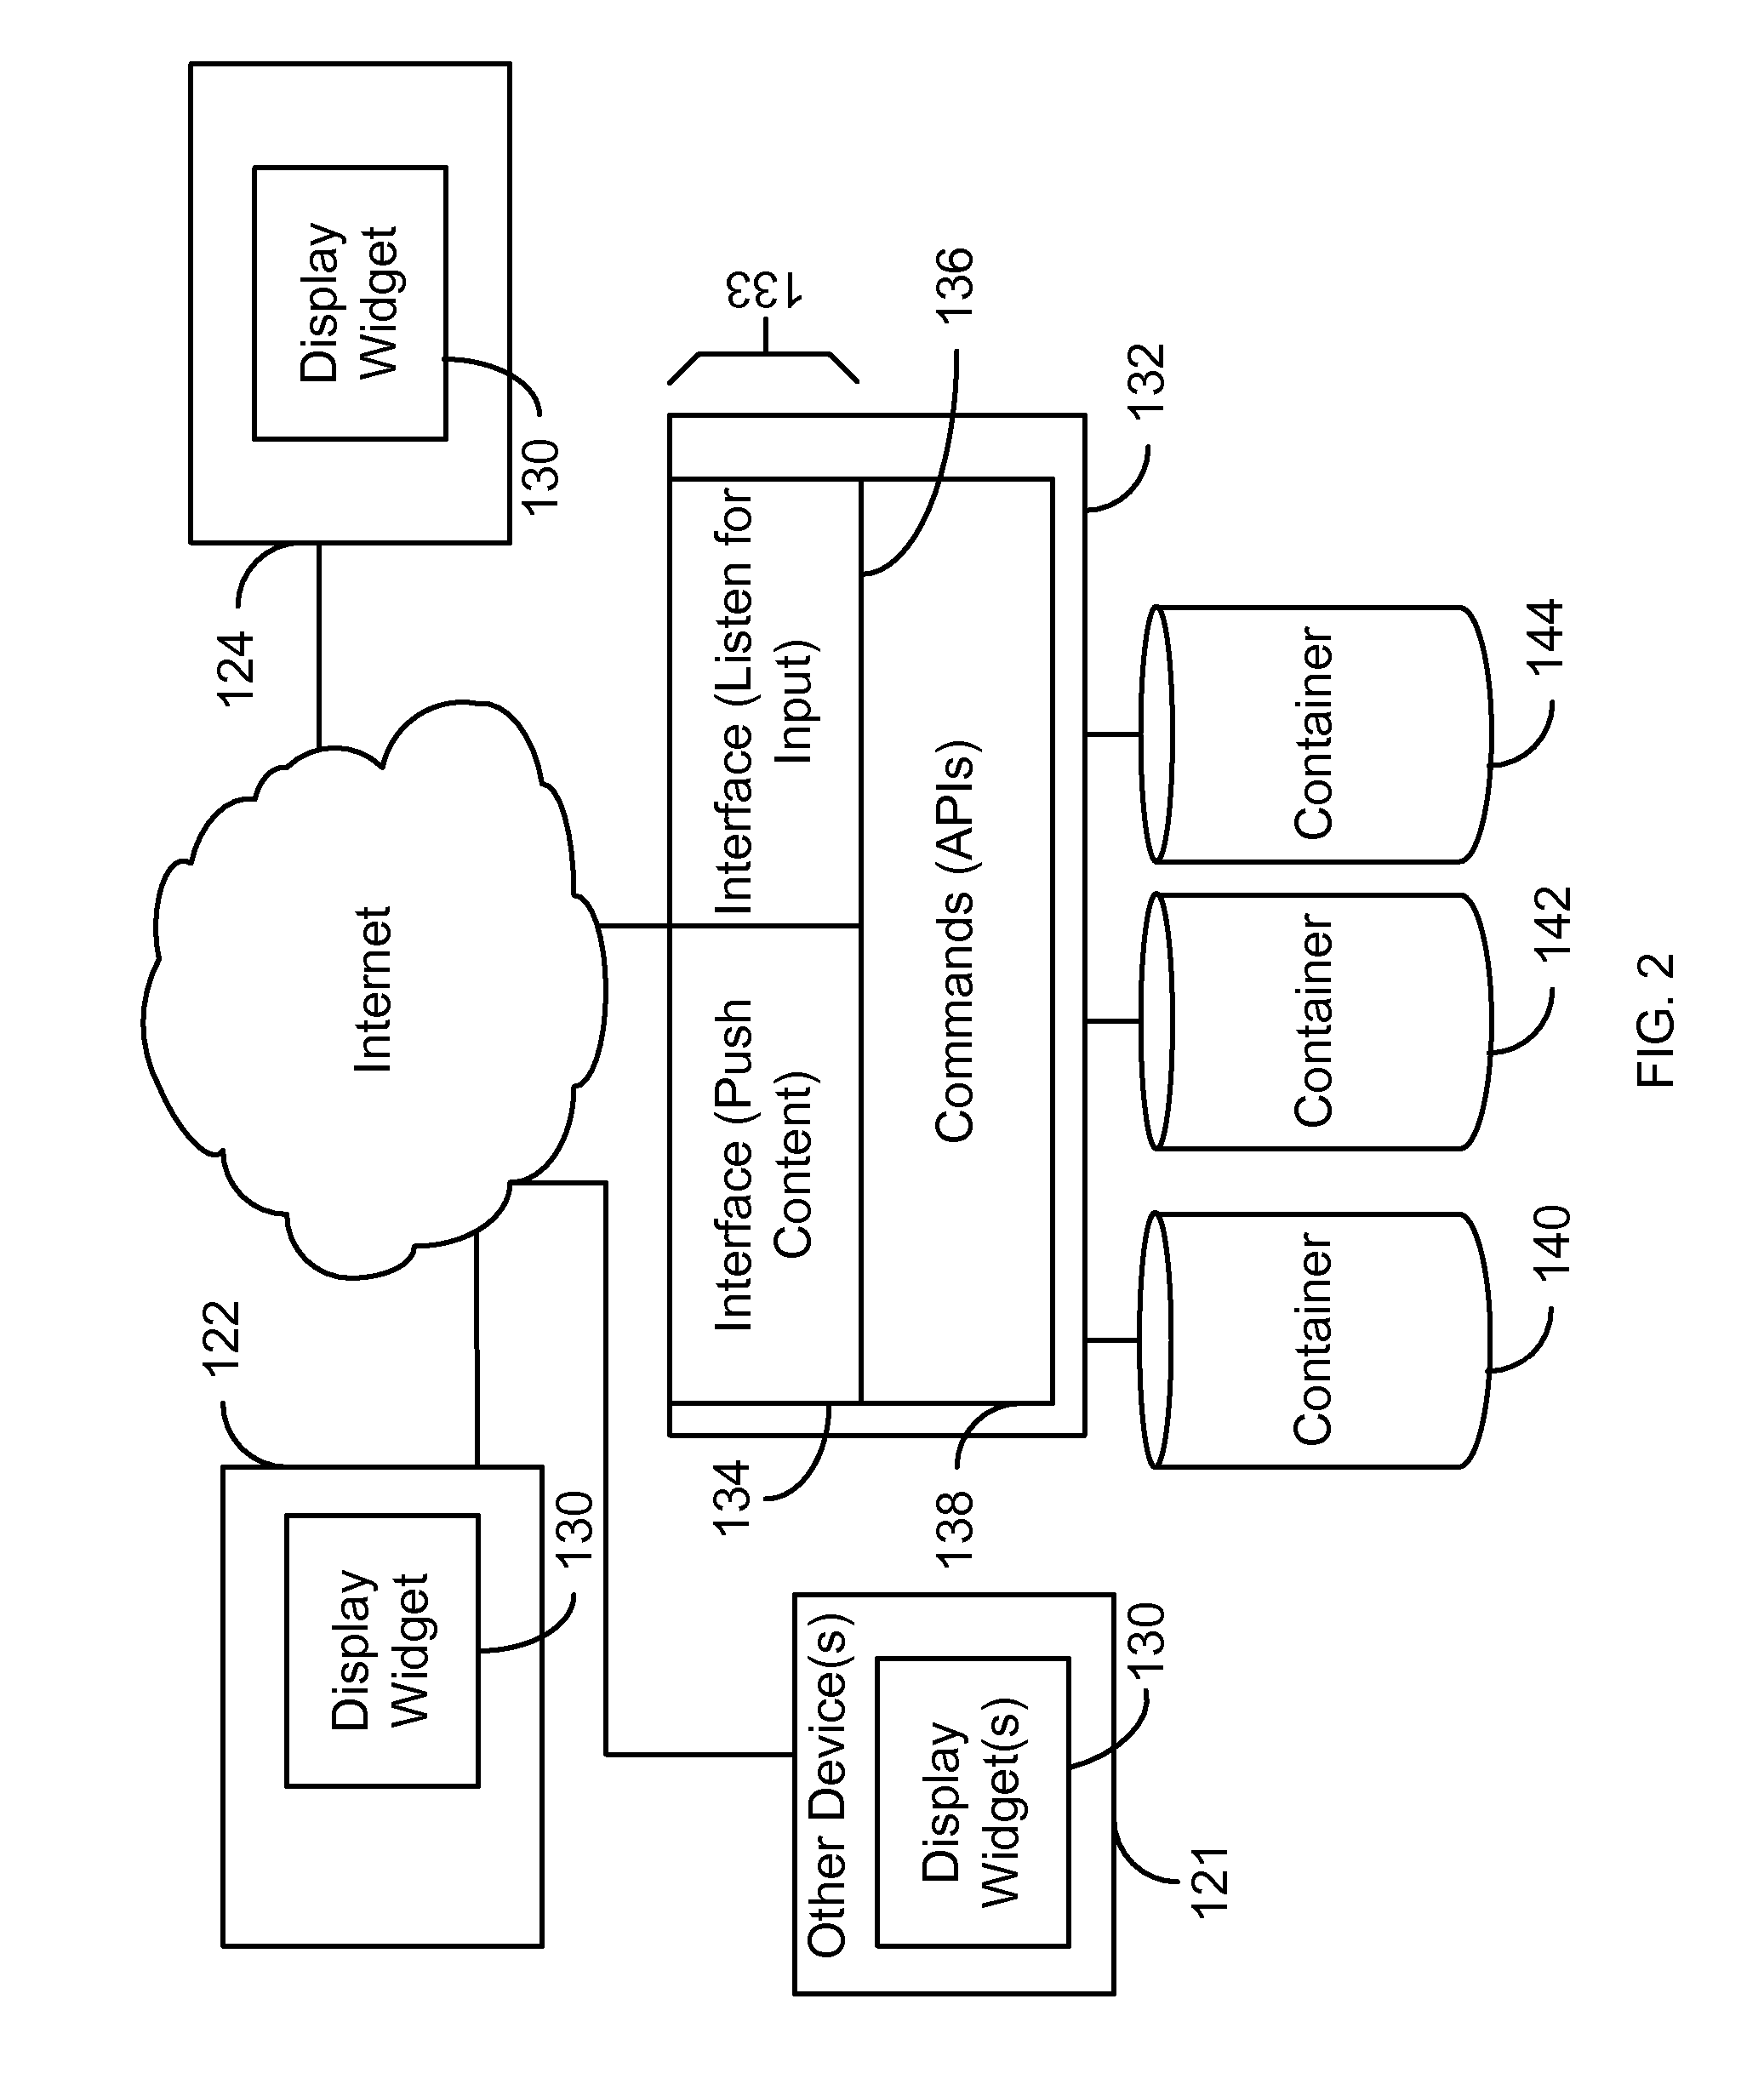 Method and system for managing and maintaining multimedia content